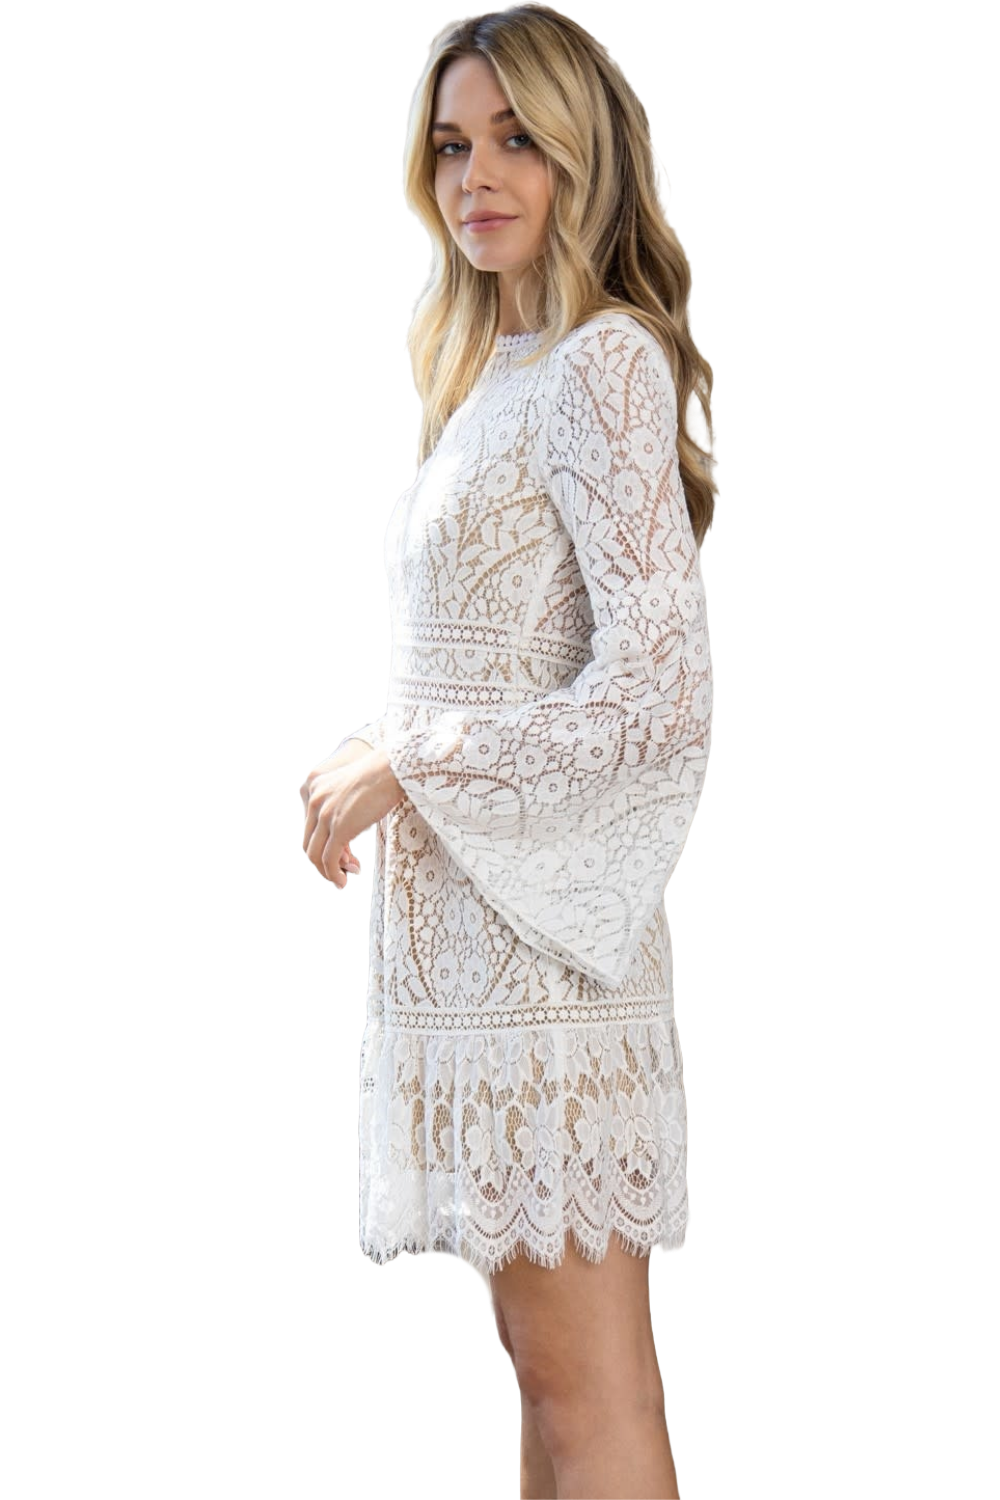 Romantic White Lace High Neck Dress with Bell Sleeve